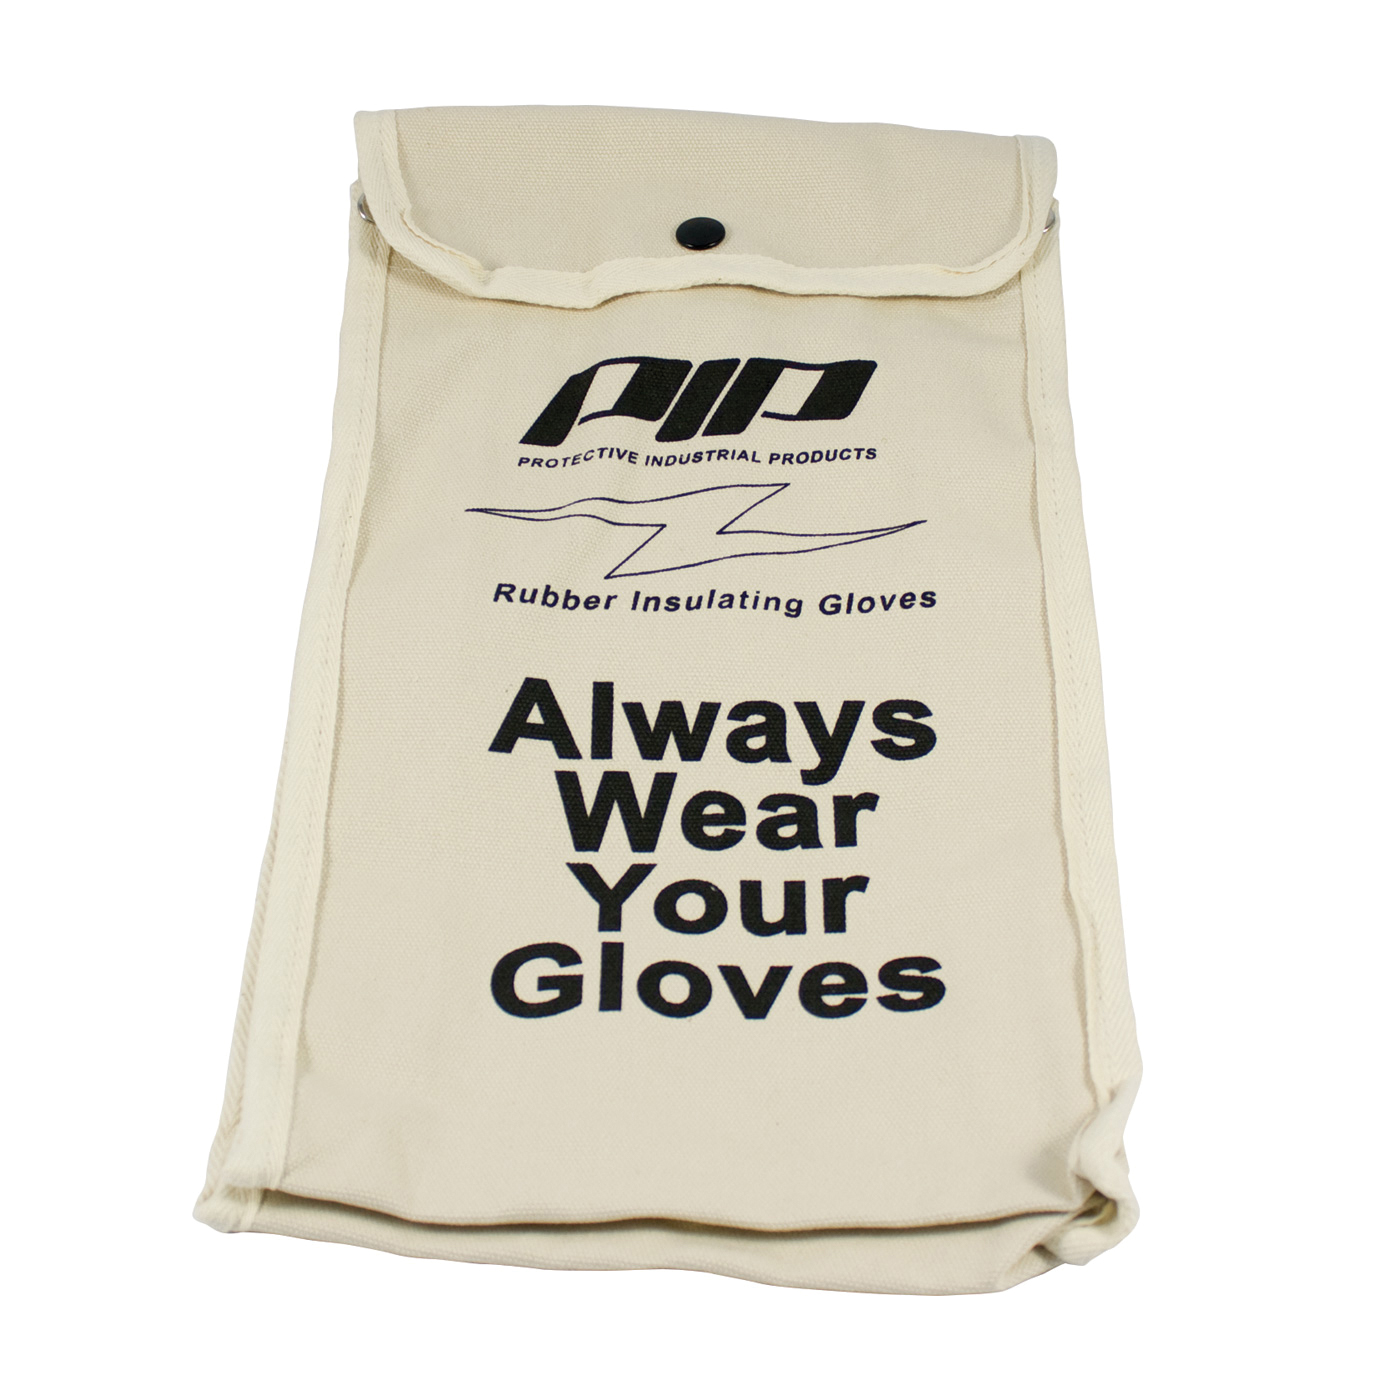 Novax® 148-6014 Protective Bag, Snap Closure, For Use With 14 in Insulating Gloves, Cotton Canvas, Natural with Black Lettering